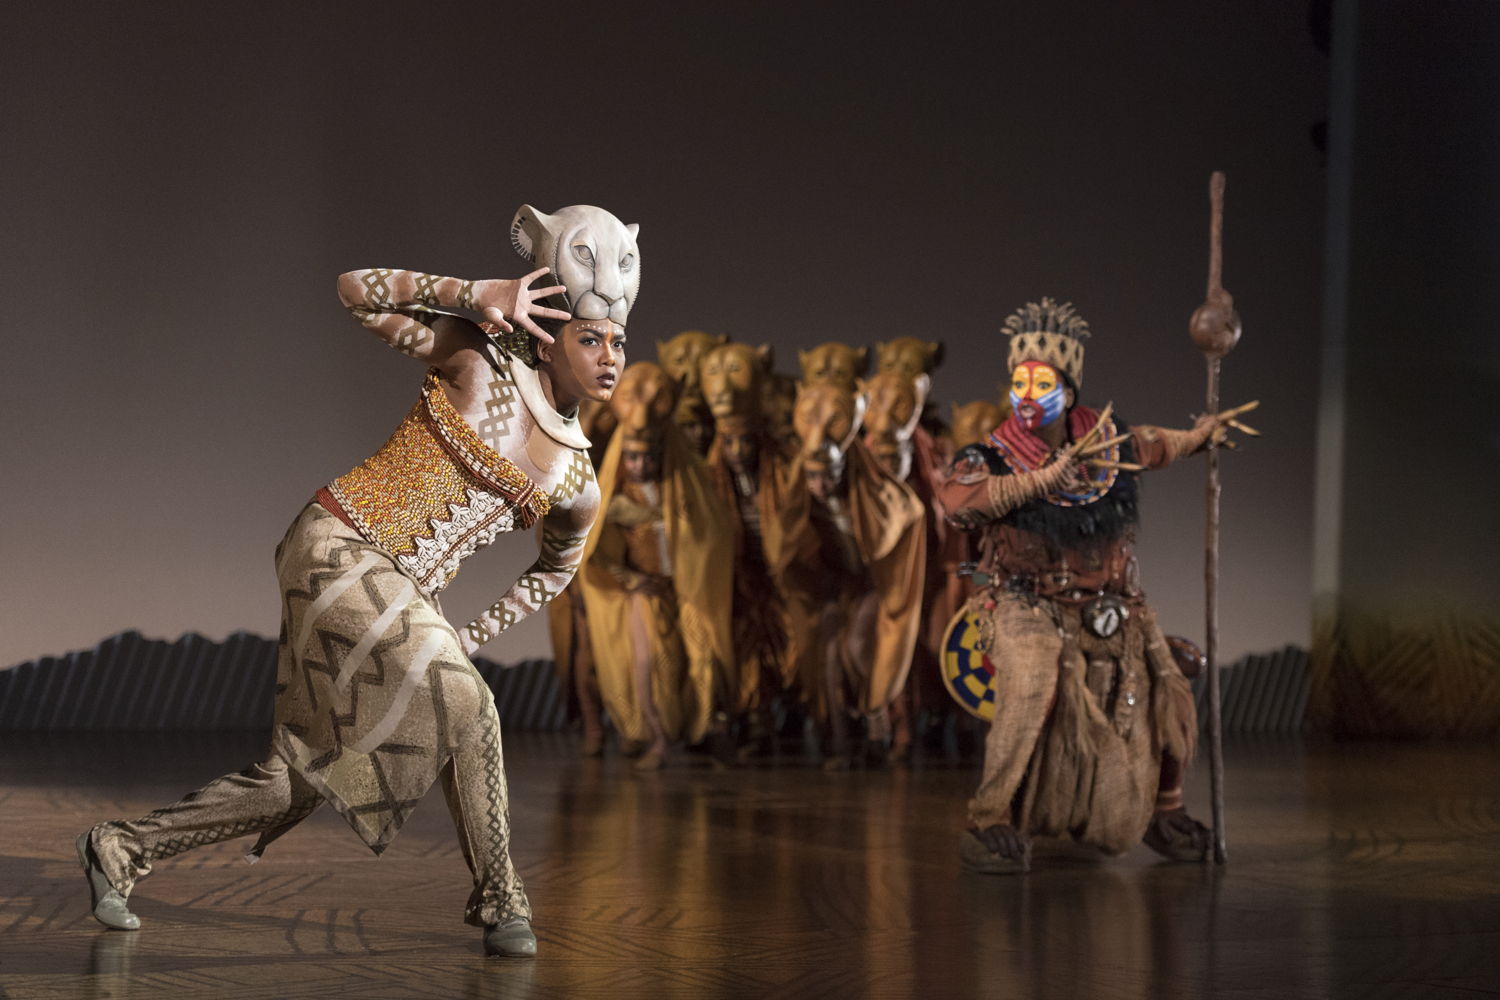 Nia Holloway as “Nala,” Buyi Zama as “Rafiki” and “The Lionesses” in THE LION KING North American Tour.  ©Disney. Photo Credit: Deen van Meer